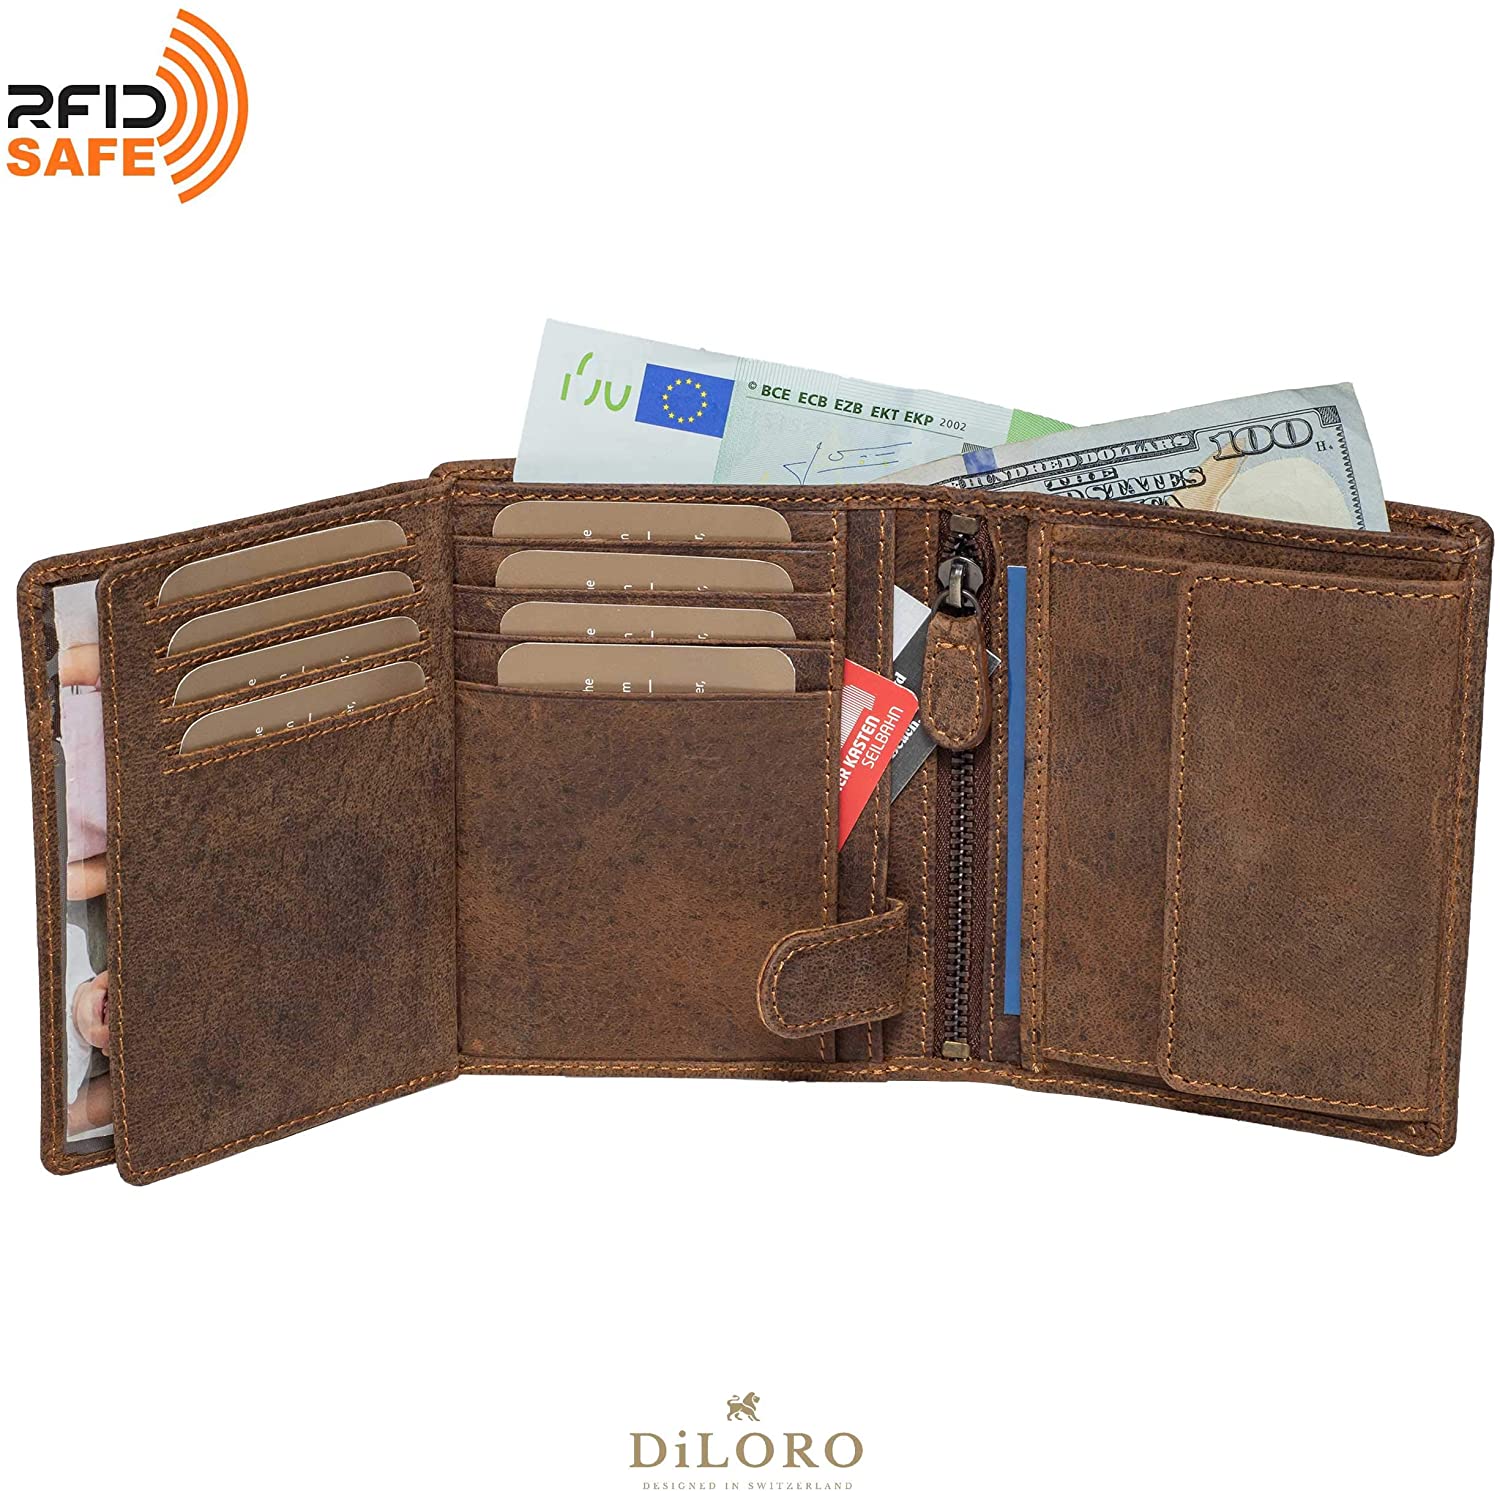 DiLoro Men's Large Bifold Leather Wallet